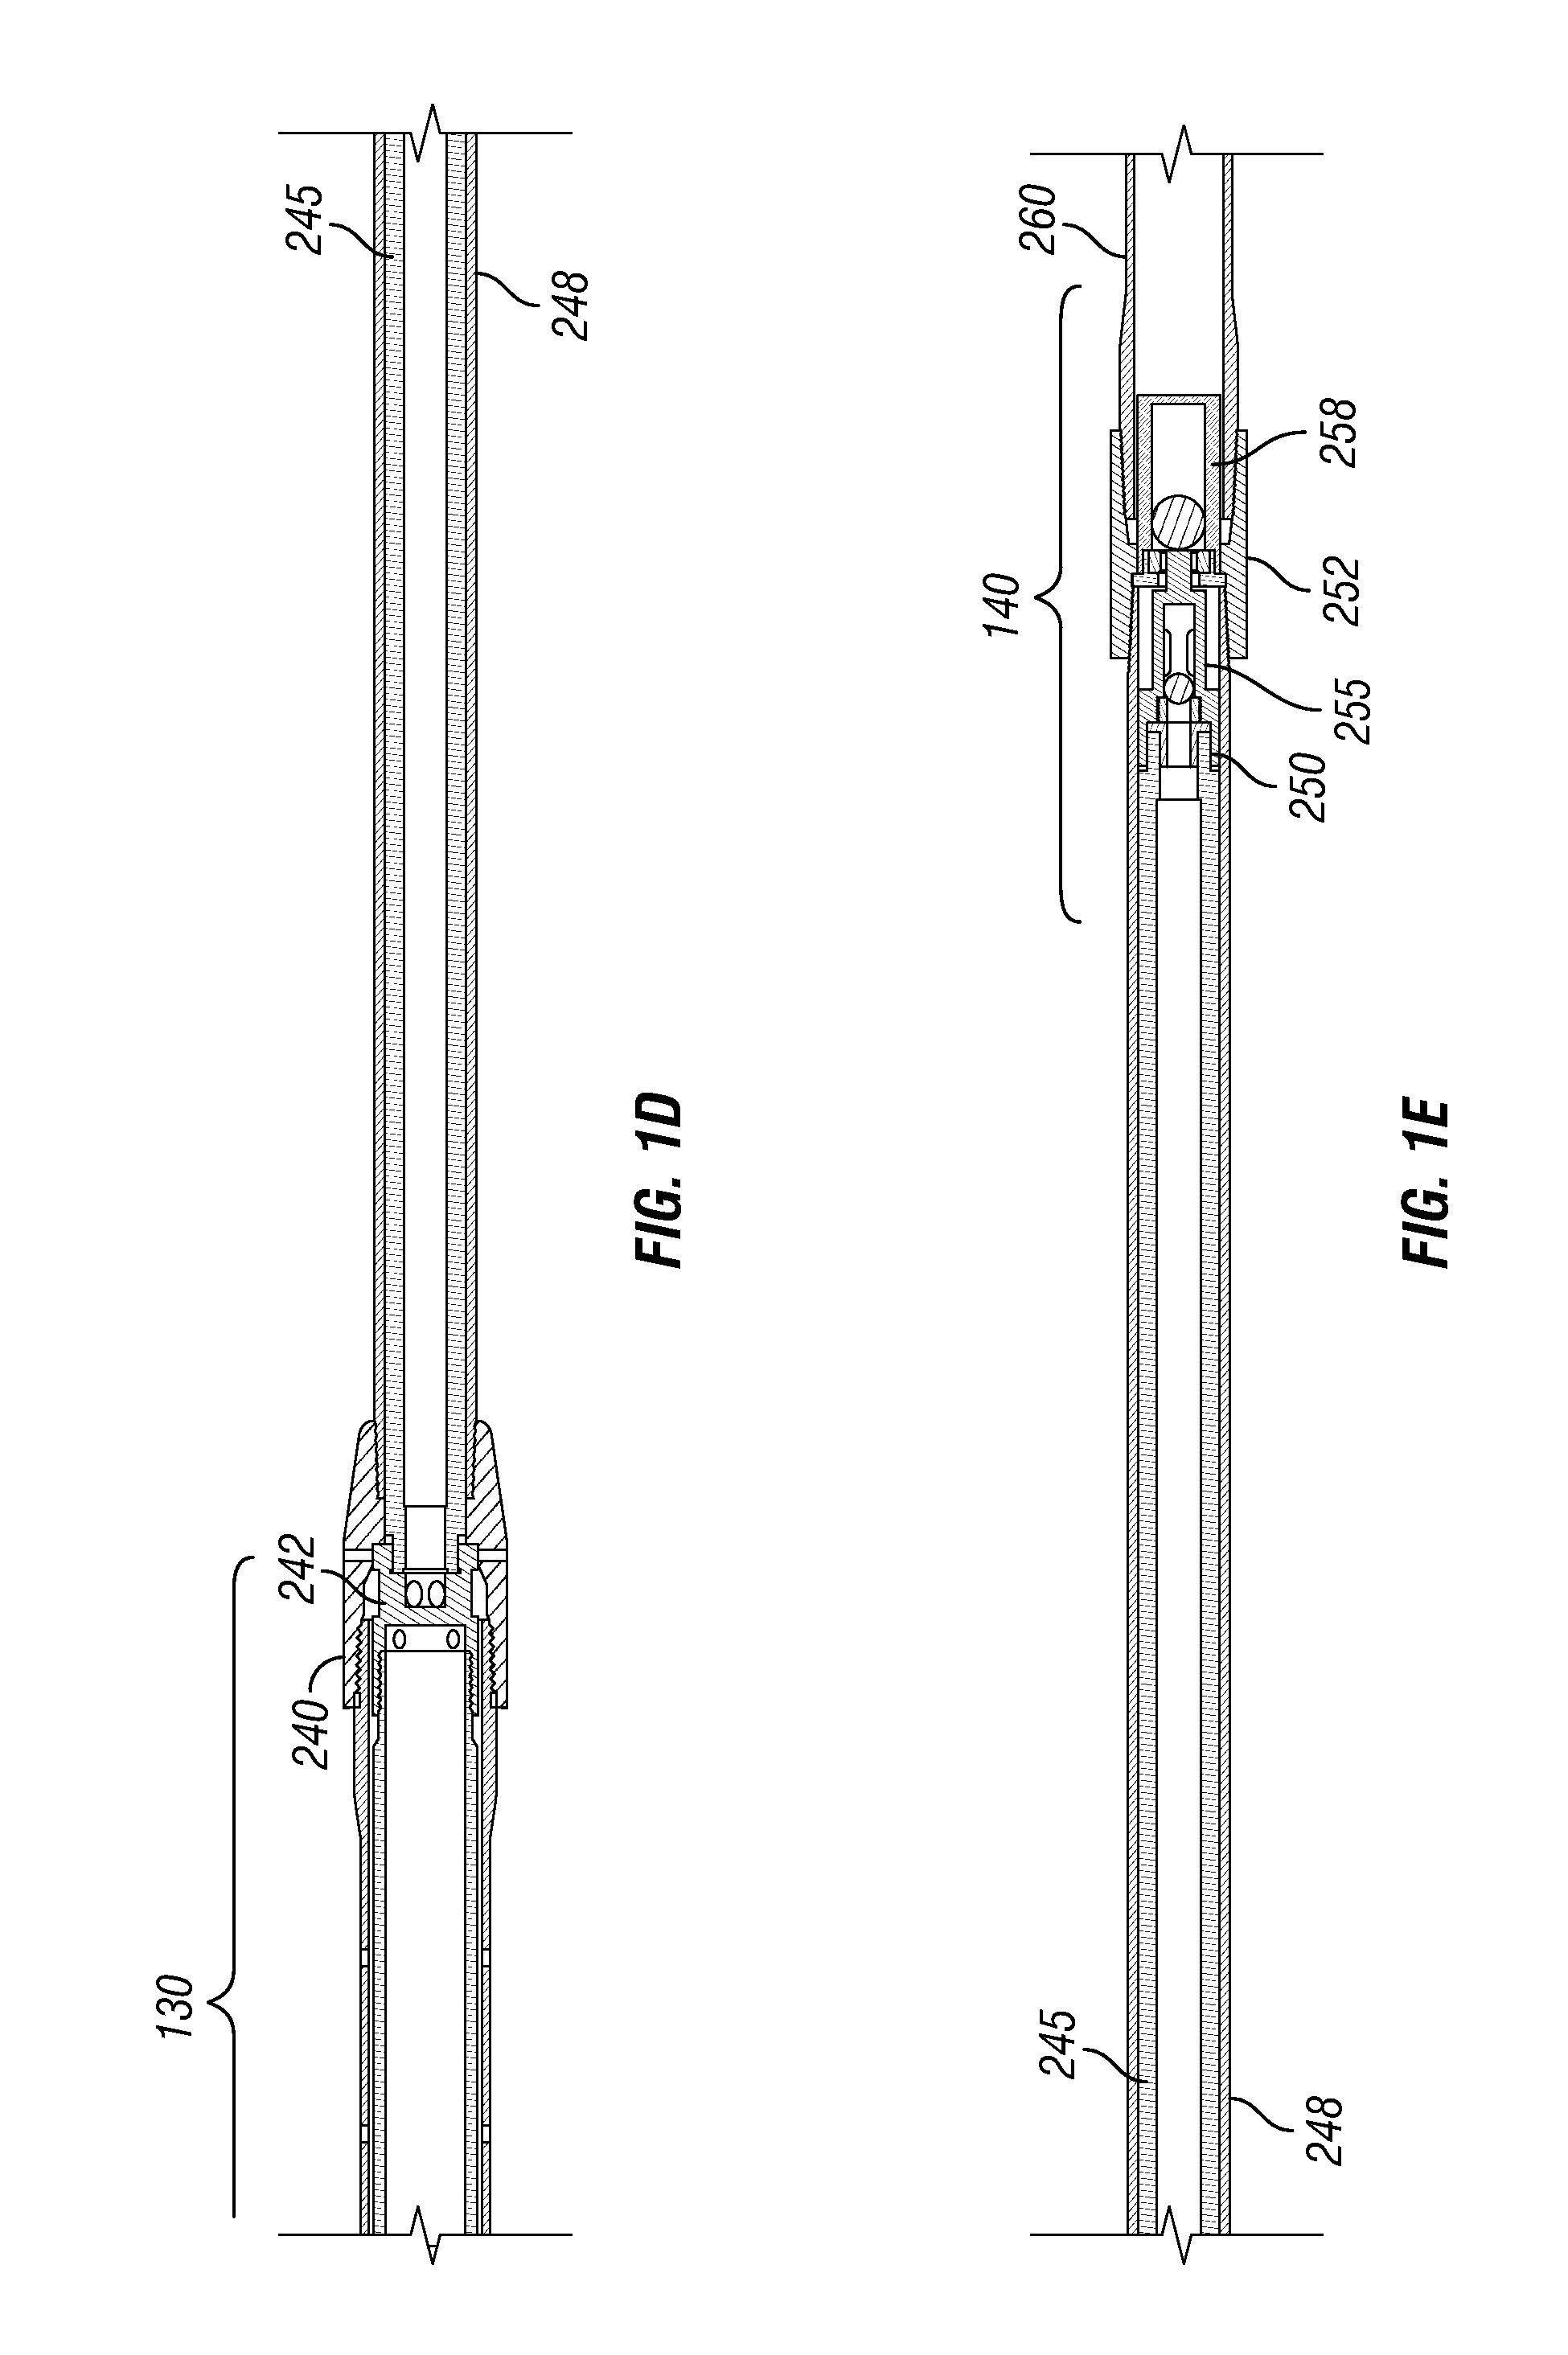 Linear pump and motor systems and methods